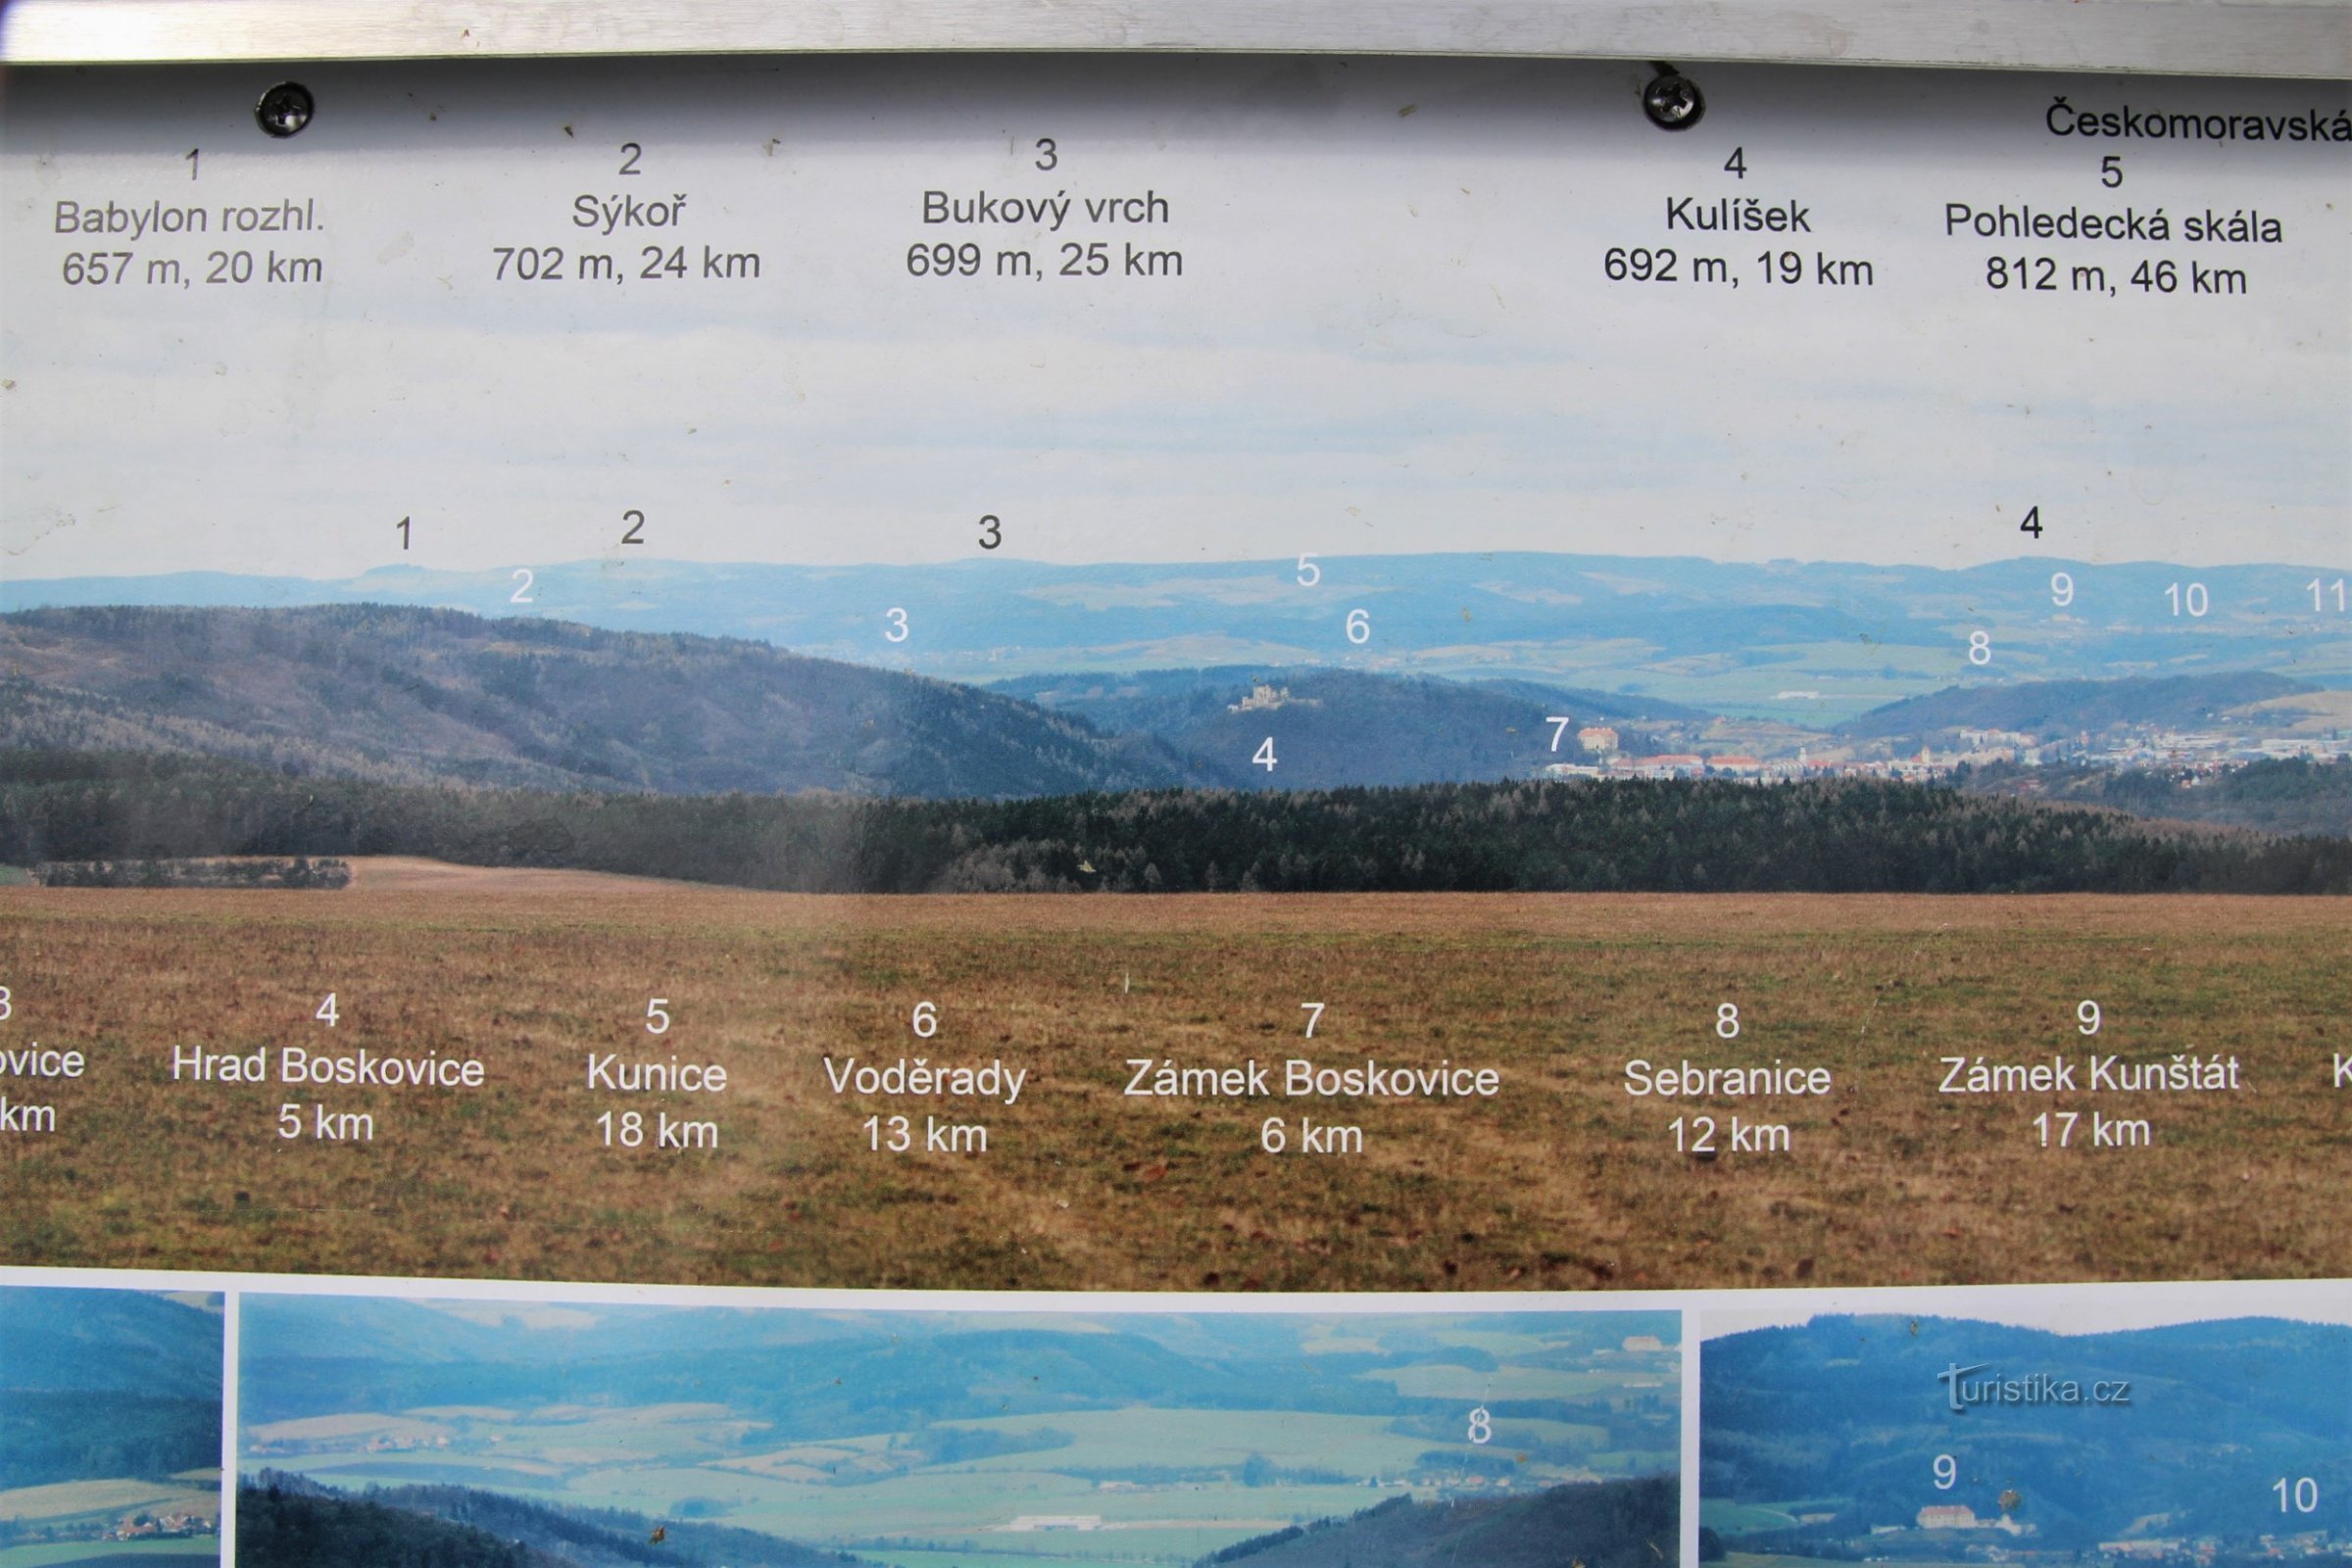 Panel with panorama and description